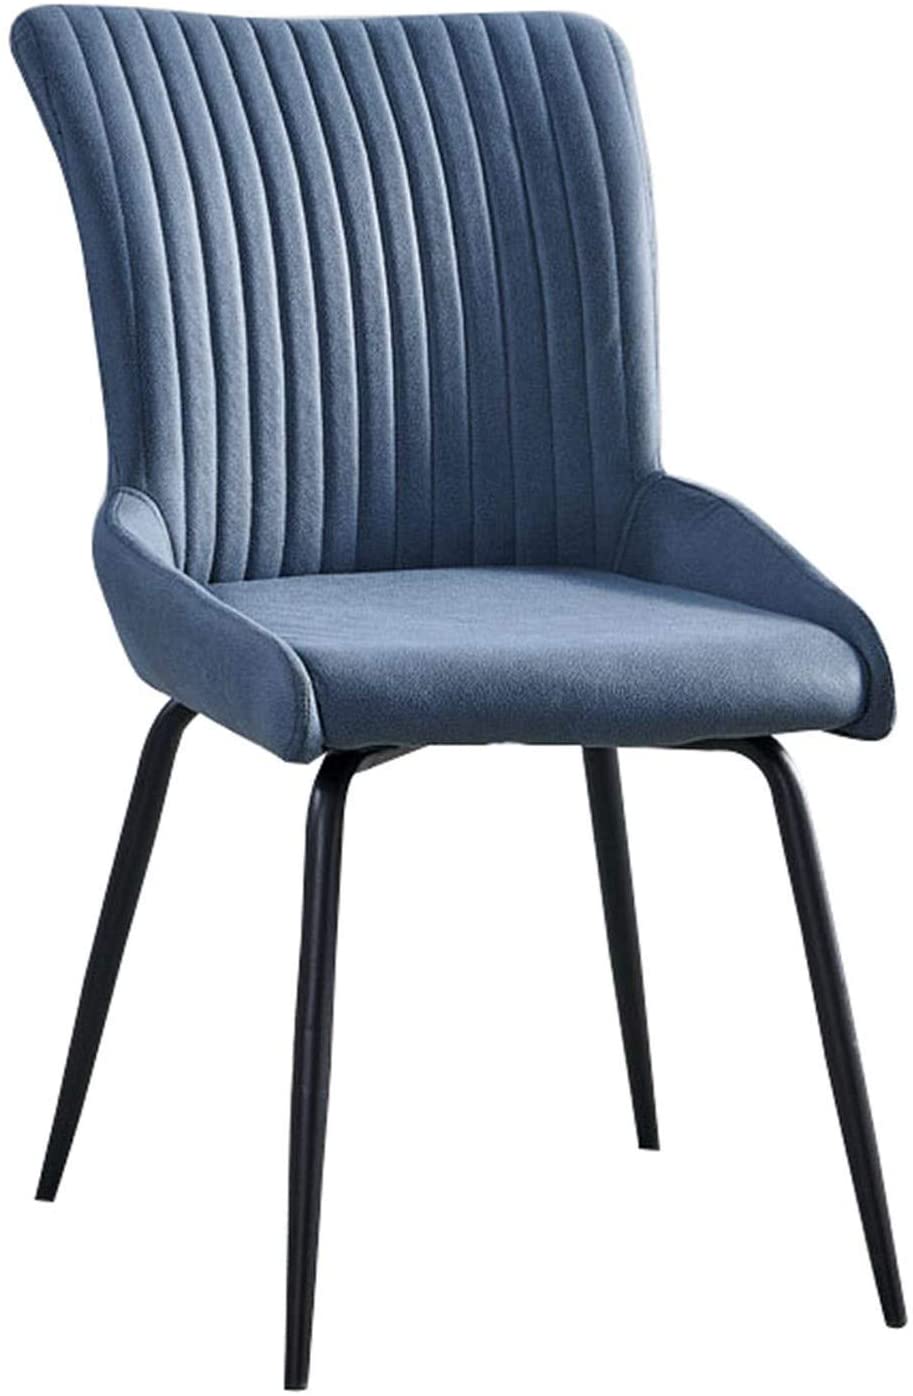 B08LGJLQRL LYHT Retro Lounge Chairs with Backrest Dining Chair for Dining and Living Room Chairs Reception Chair Kitchen Dining Chairs (Color : Blue)